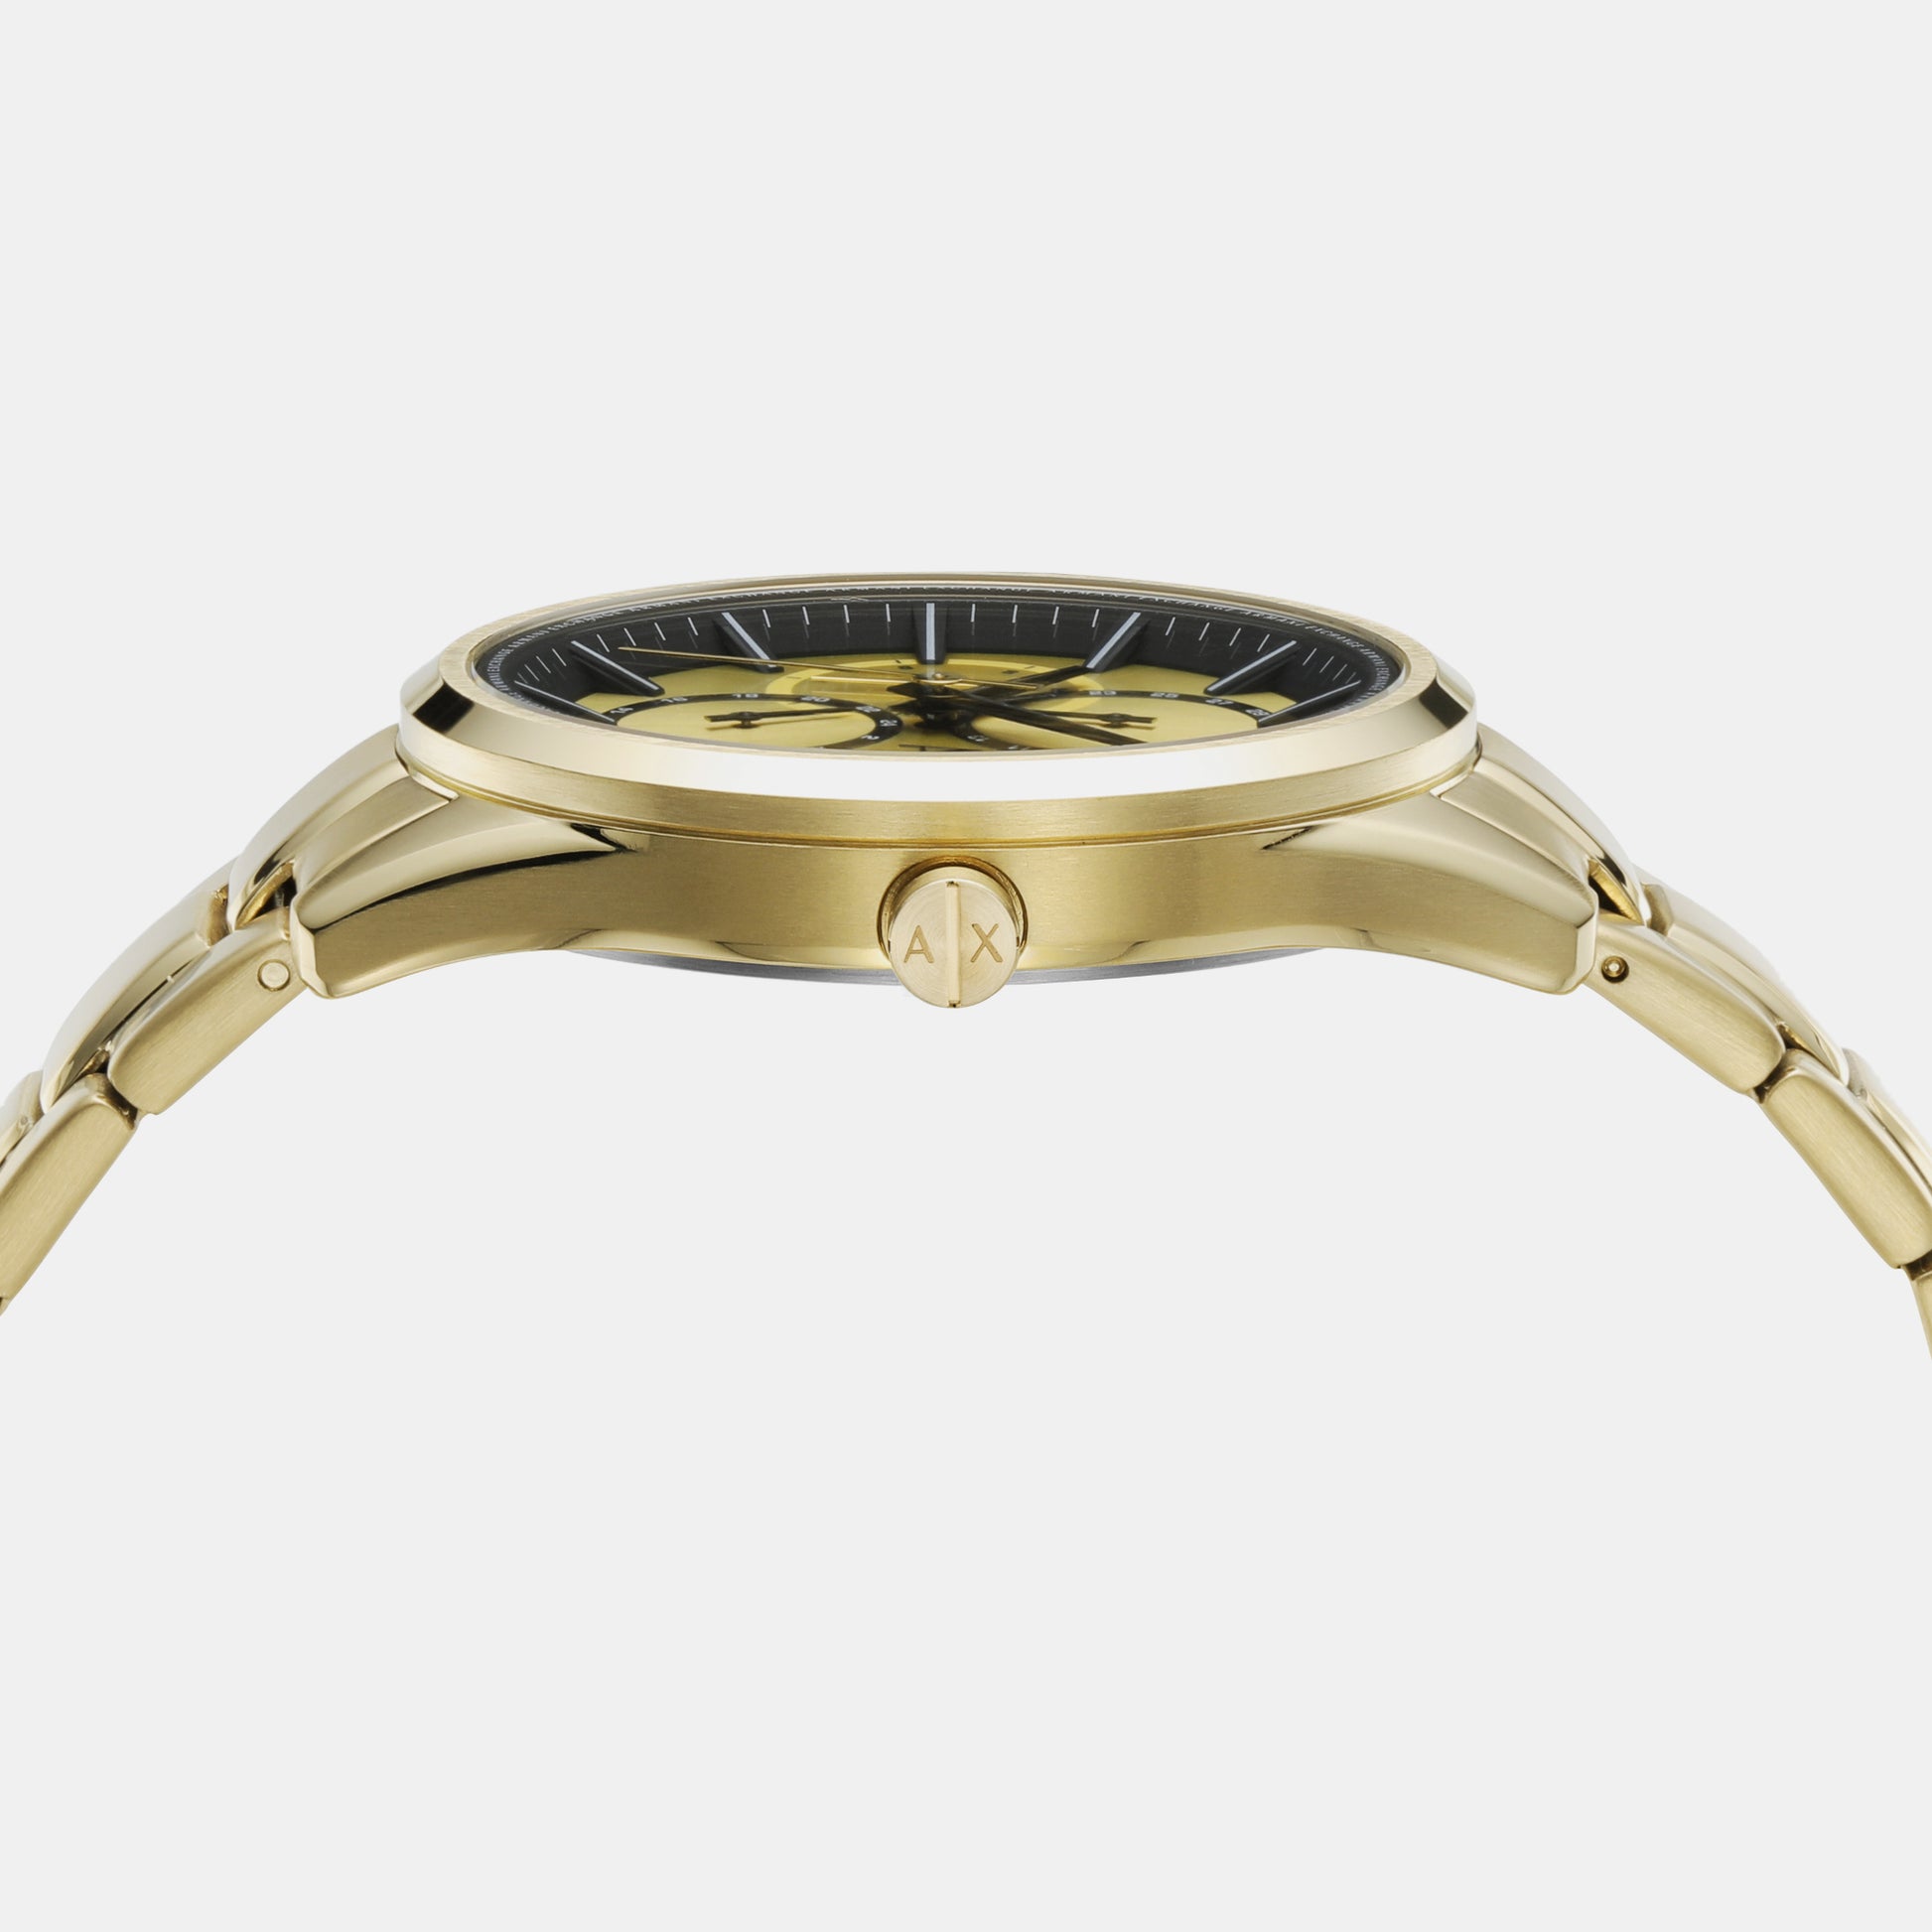 Male Gold Chronograph Stainless Steel Watch AX1866 – Just In Time